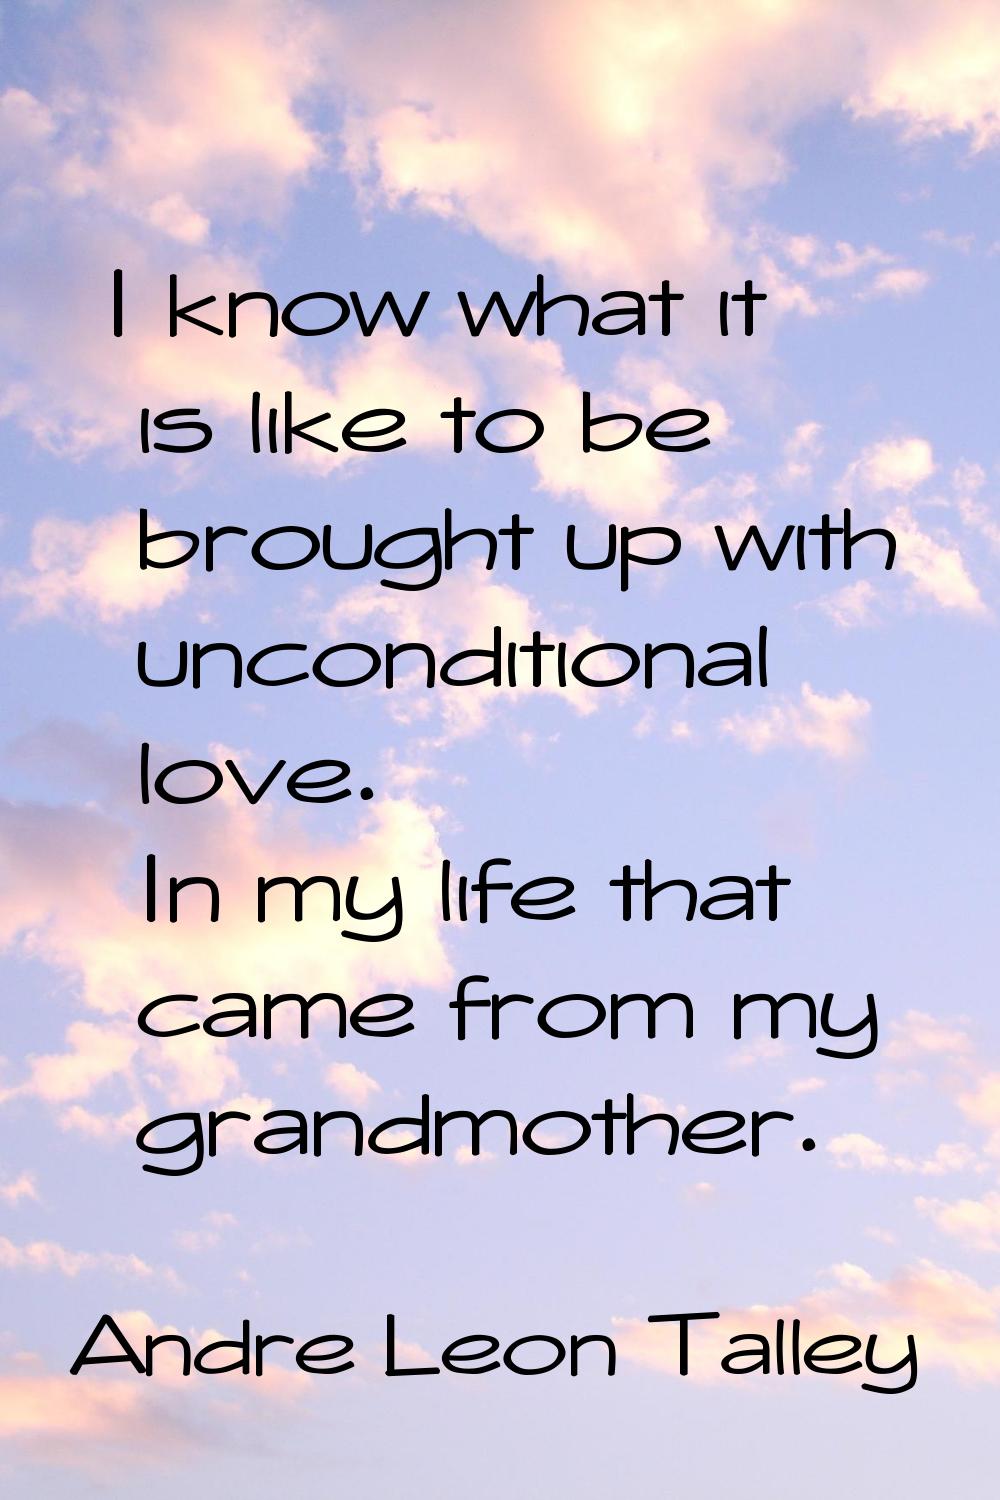 I know what it is like to be brought up with unconditional love. In my life that came from my grand